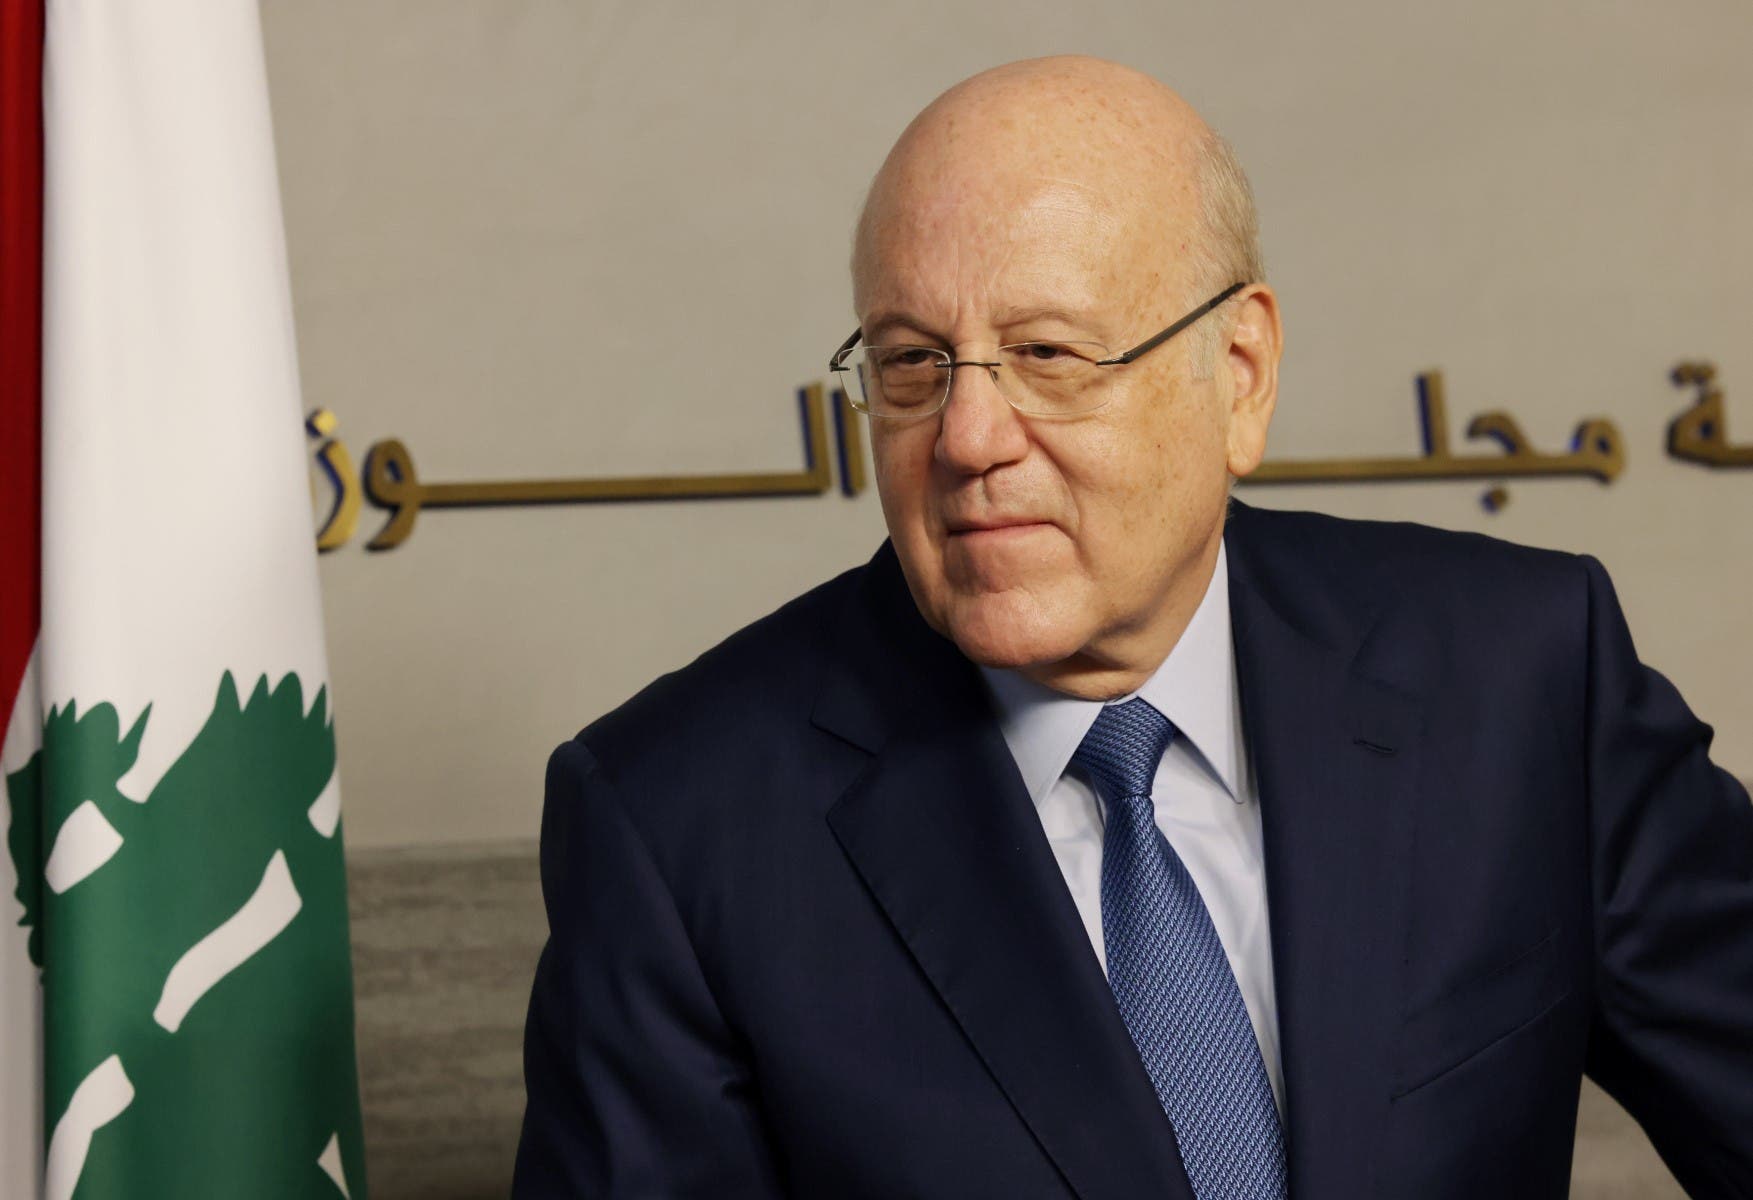 Lebanese Prime Minister Najib Mikati attends a joint press conference after his meeting with his Jordanian counterpart at the Grand Serail in Beirut, on September 30, 2021. (AFP)